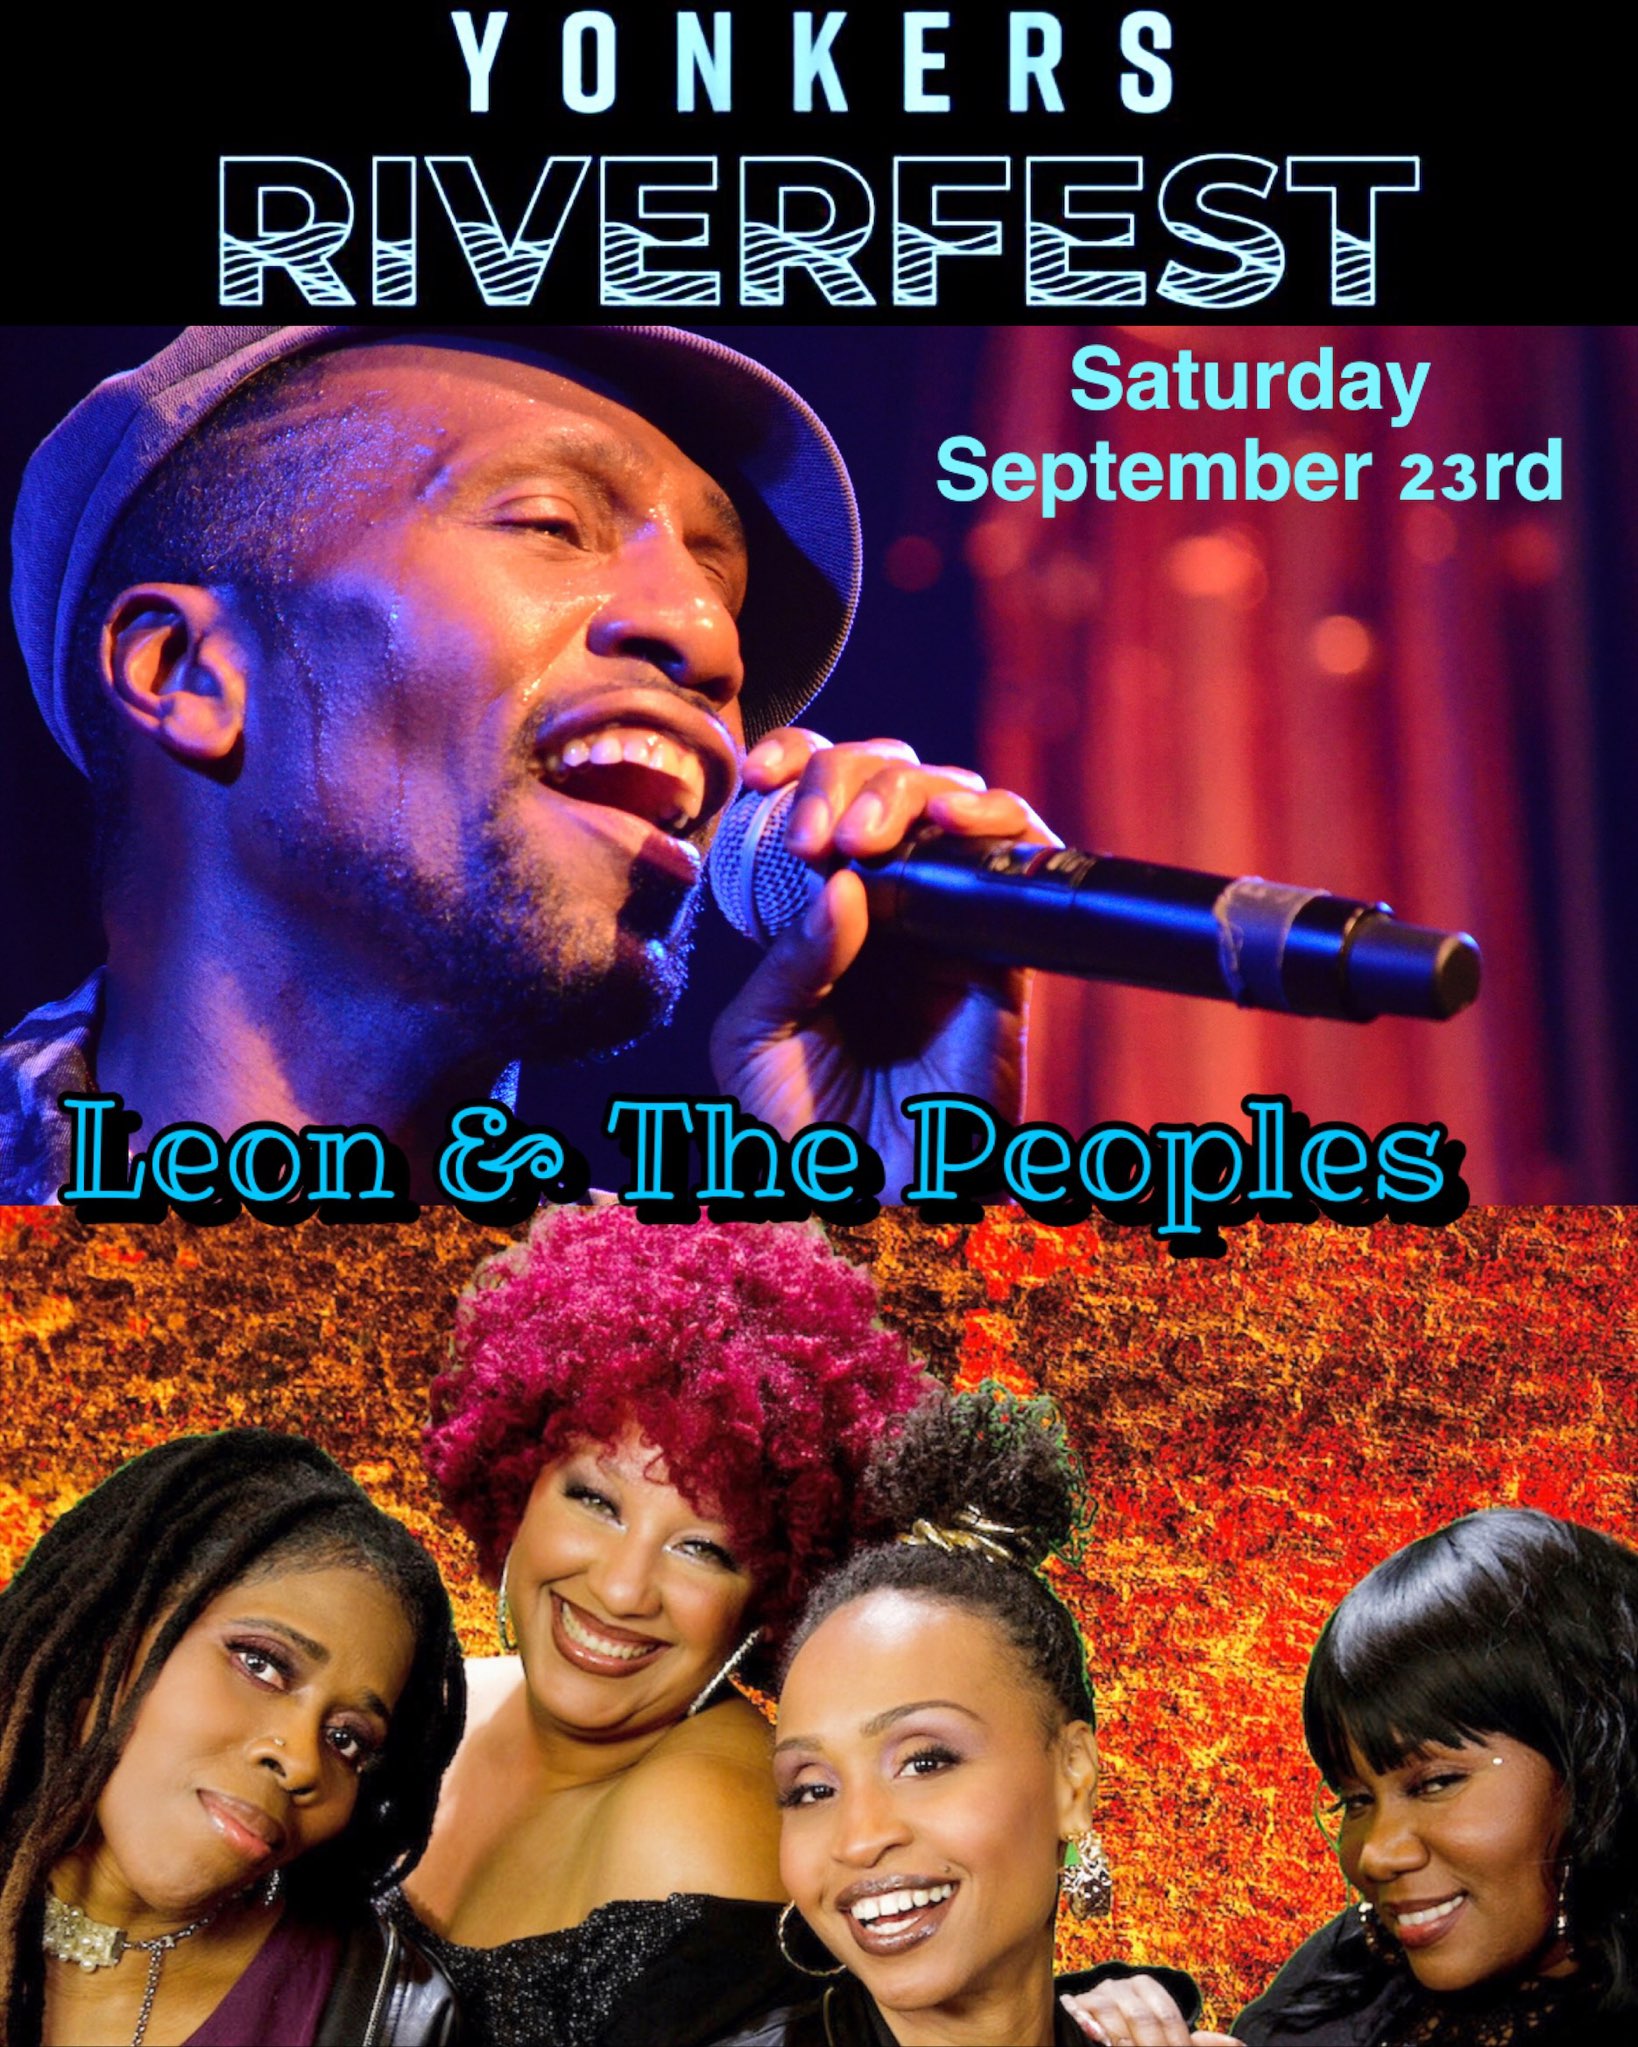 Yonkers Riverfest – September 23rd @ 12:00pm